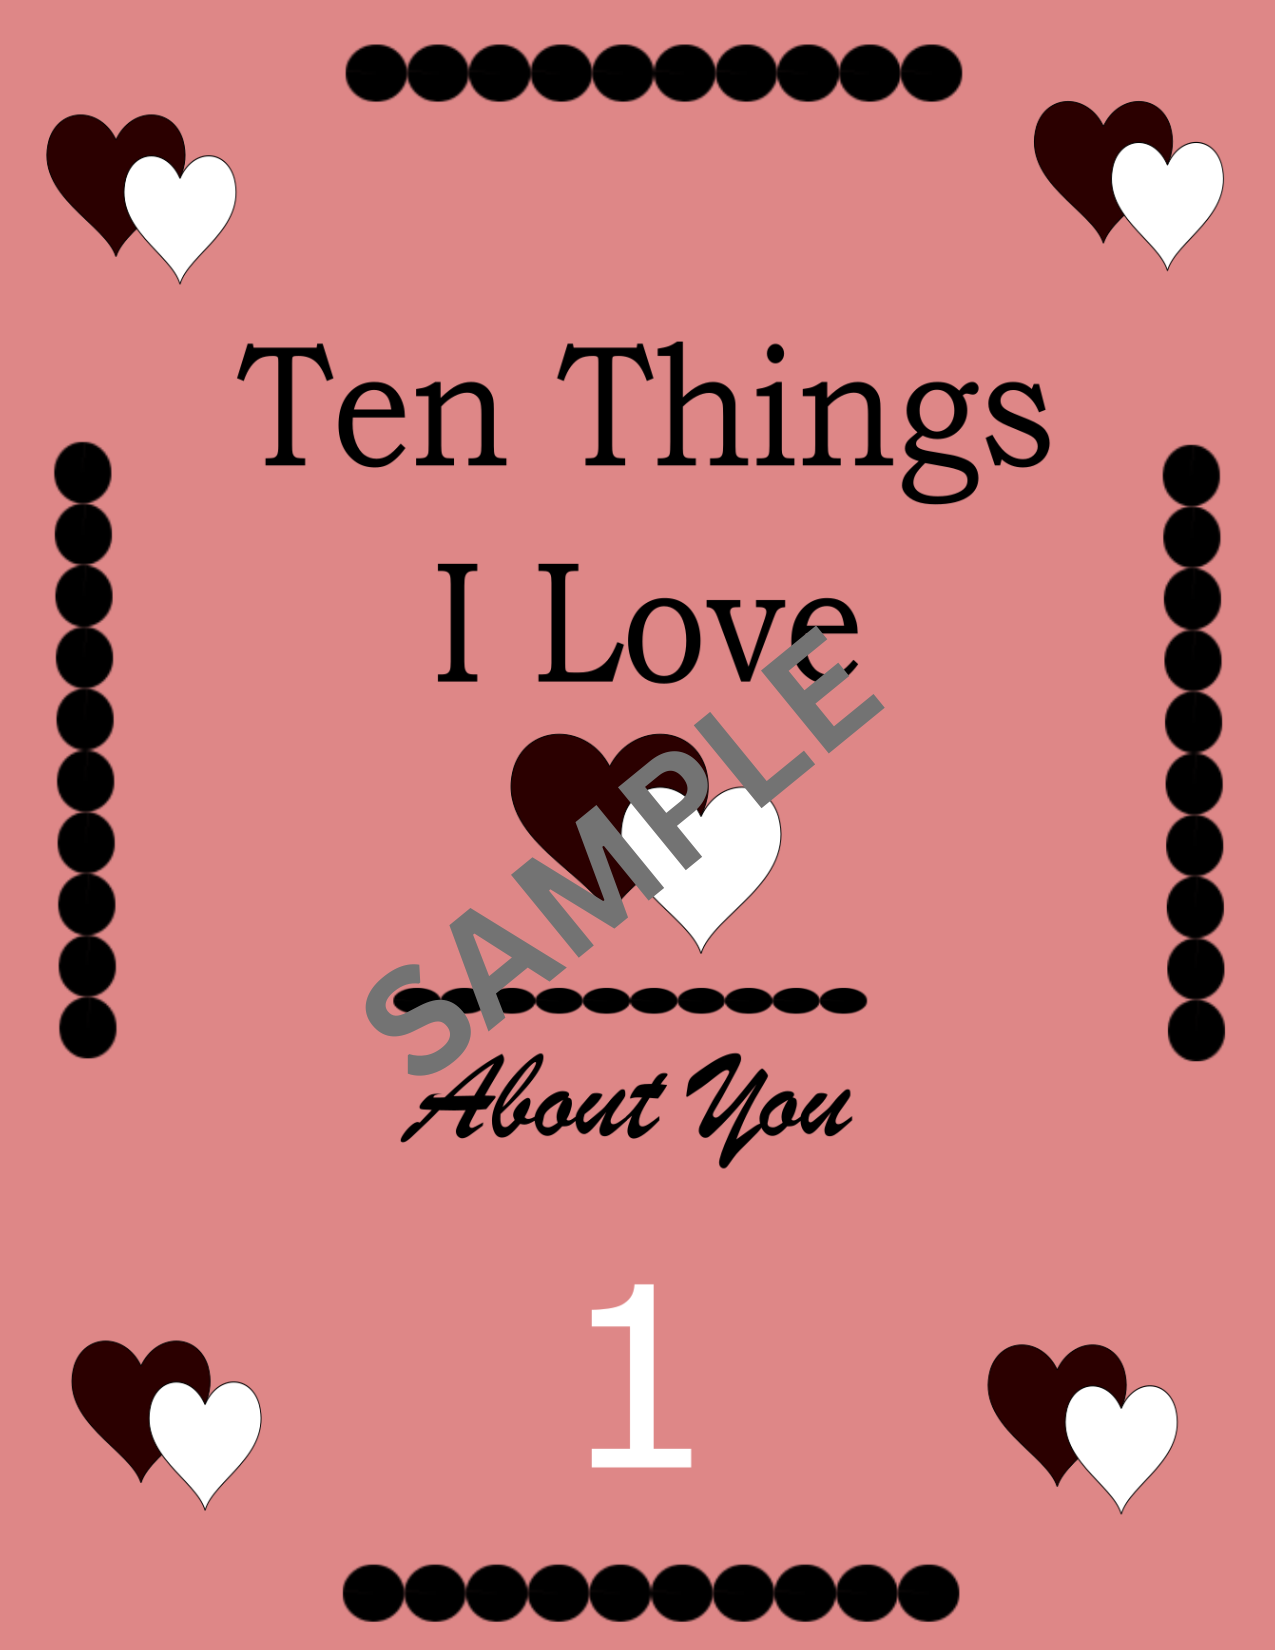 Ten Things I Love About You Printable Cards - Rose and Black